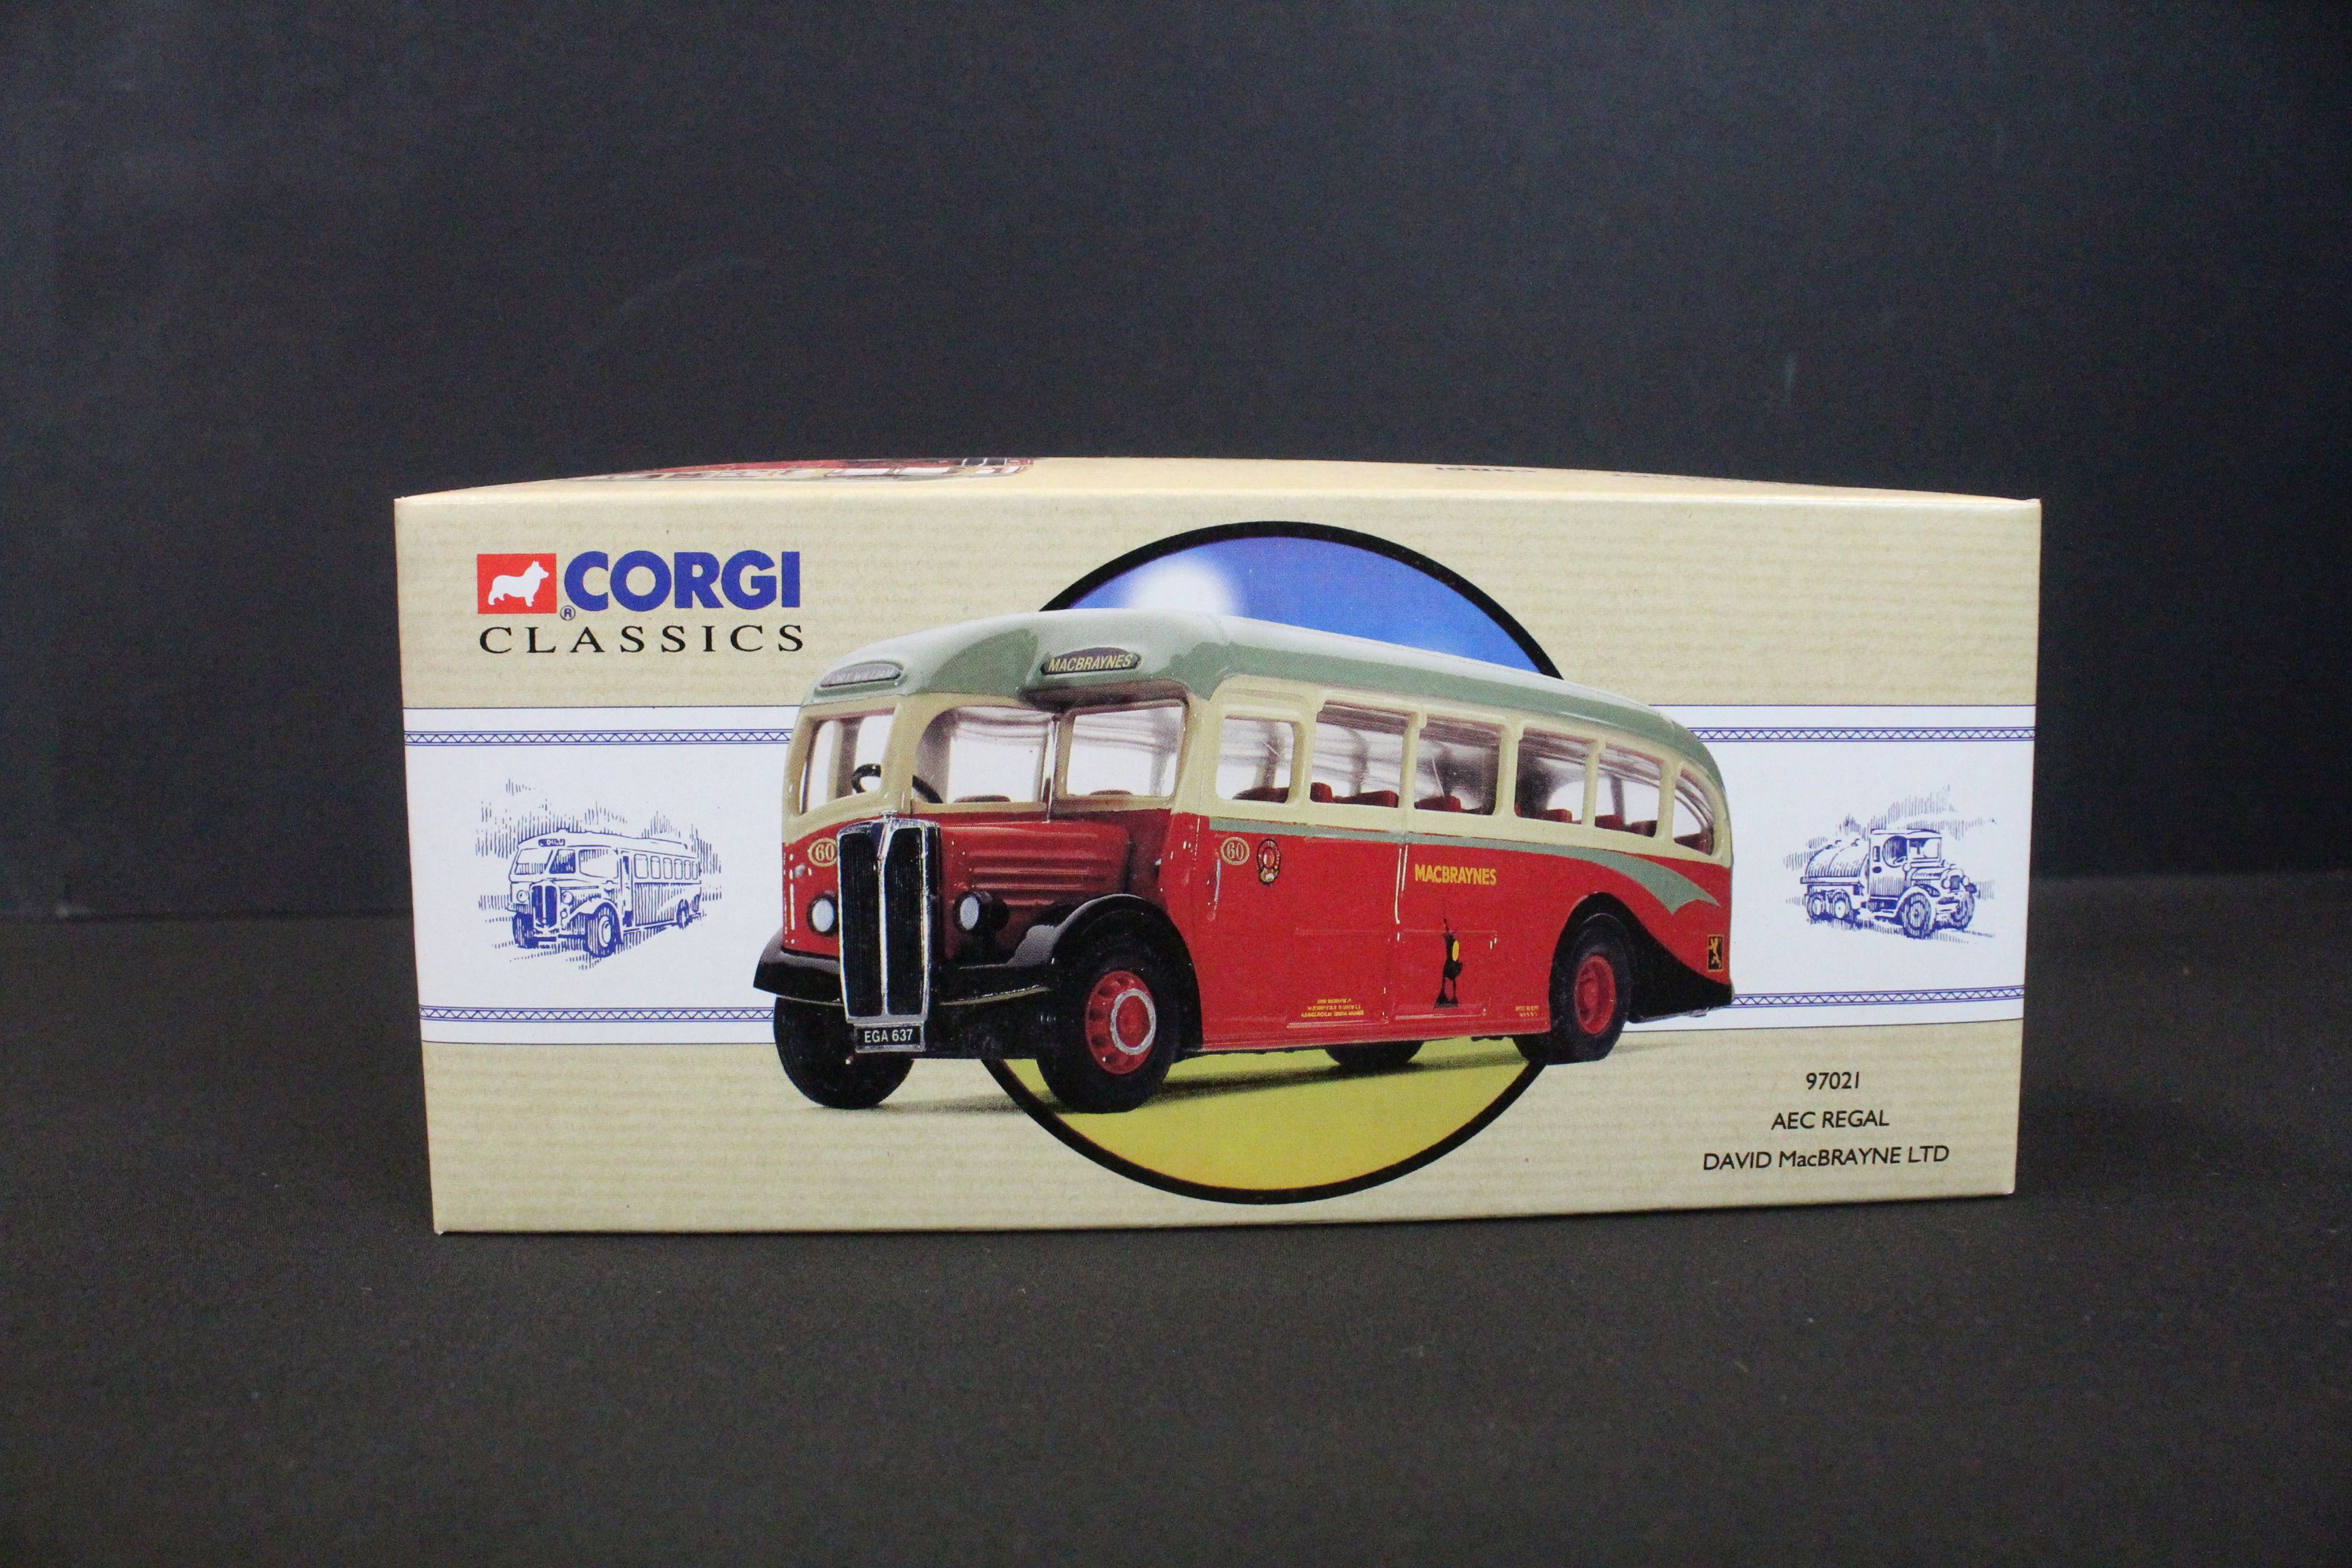 19 Boxed Corgi Public Transport from Corgi diecast models to include 2 x 97870 Karrier W4 - Image 7 of 7